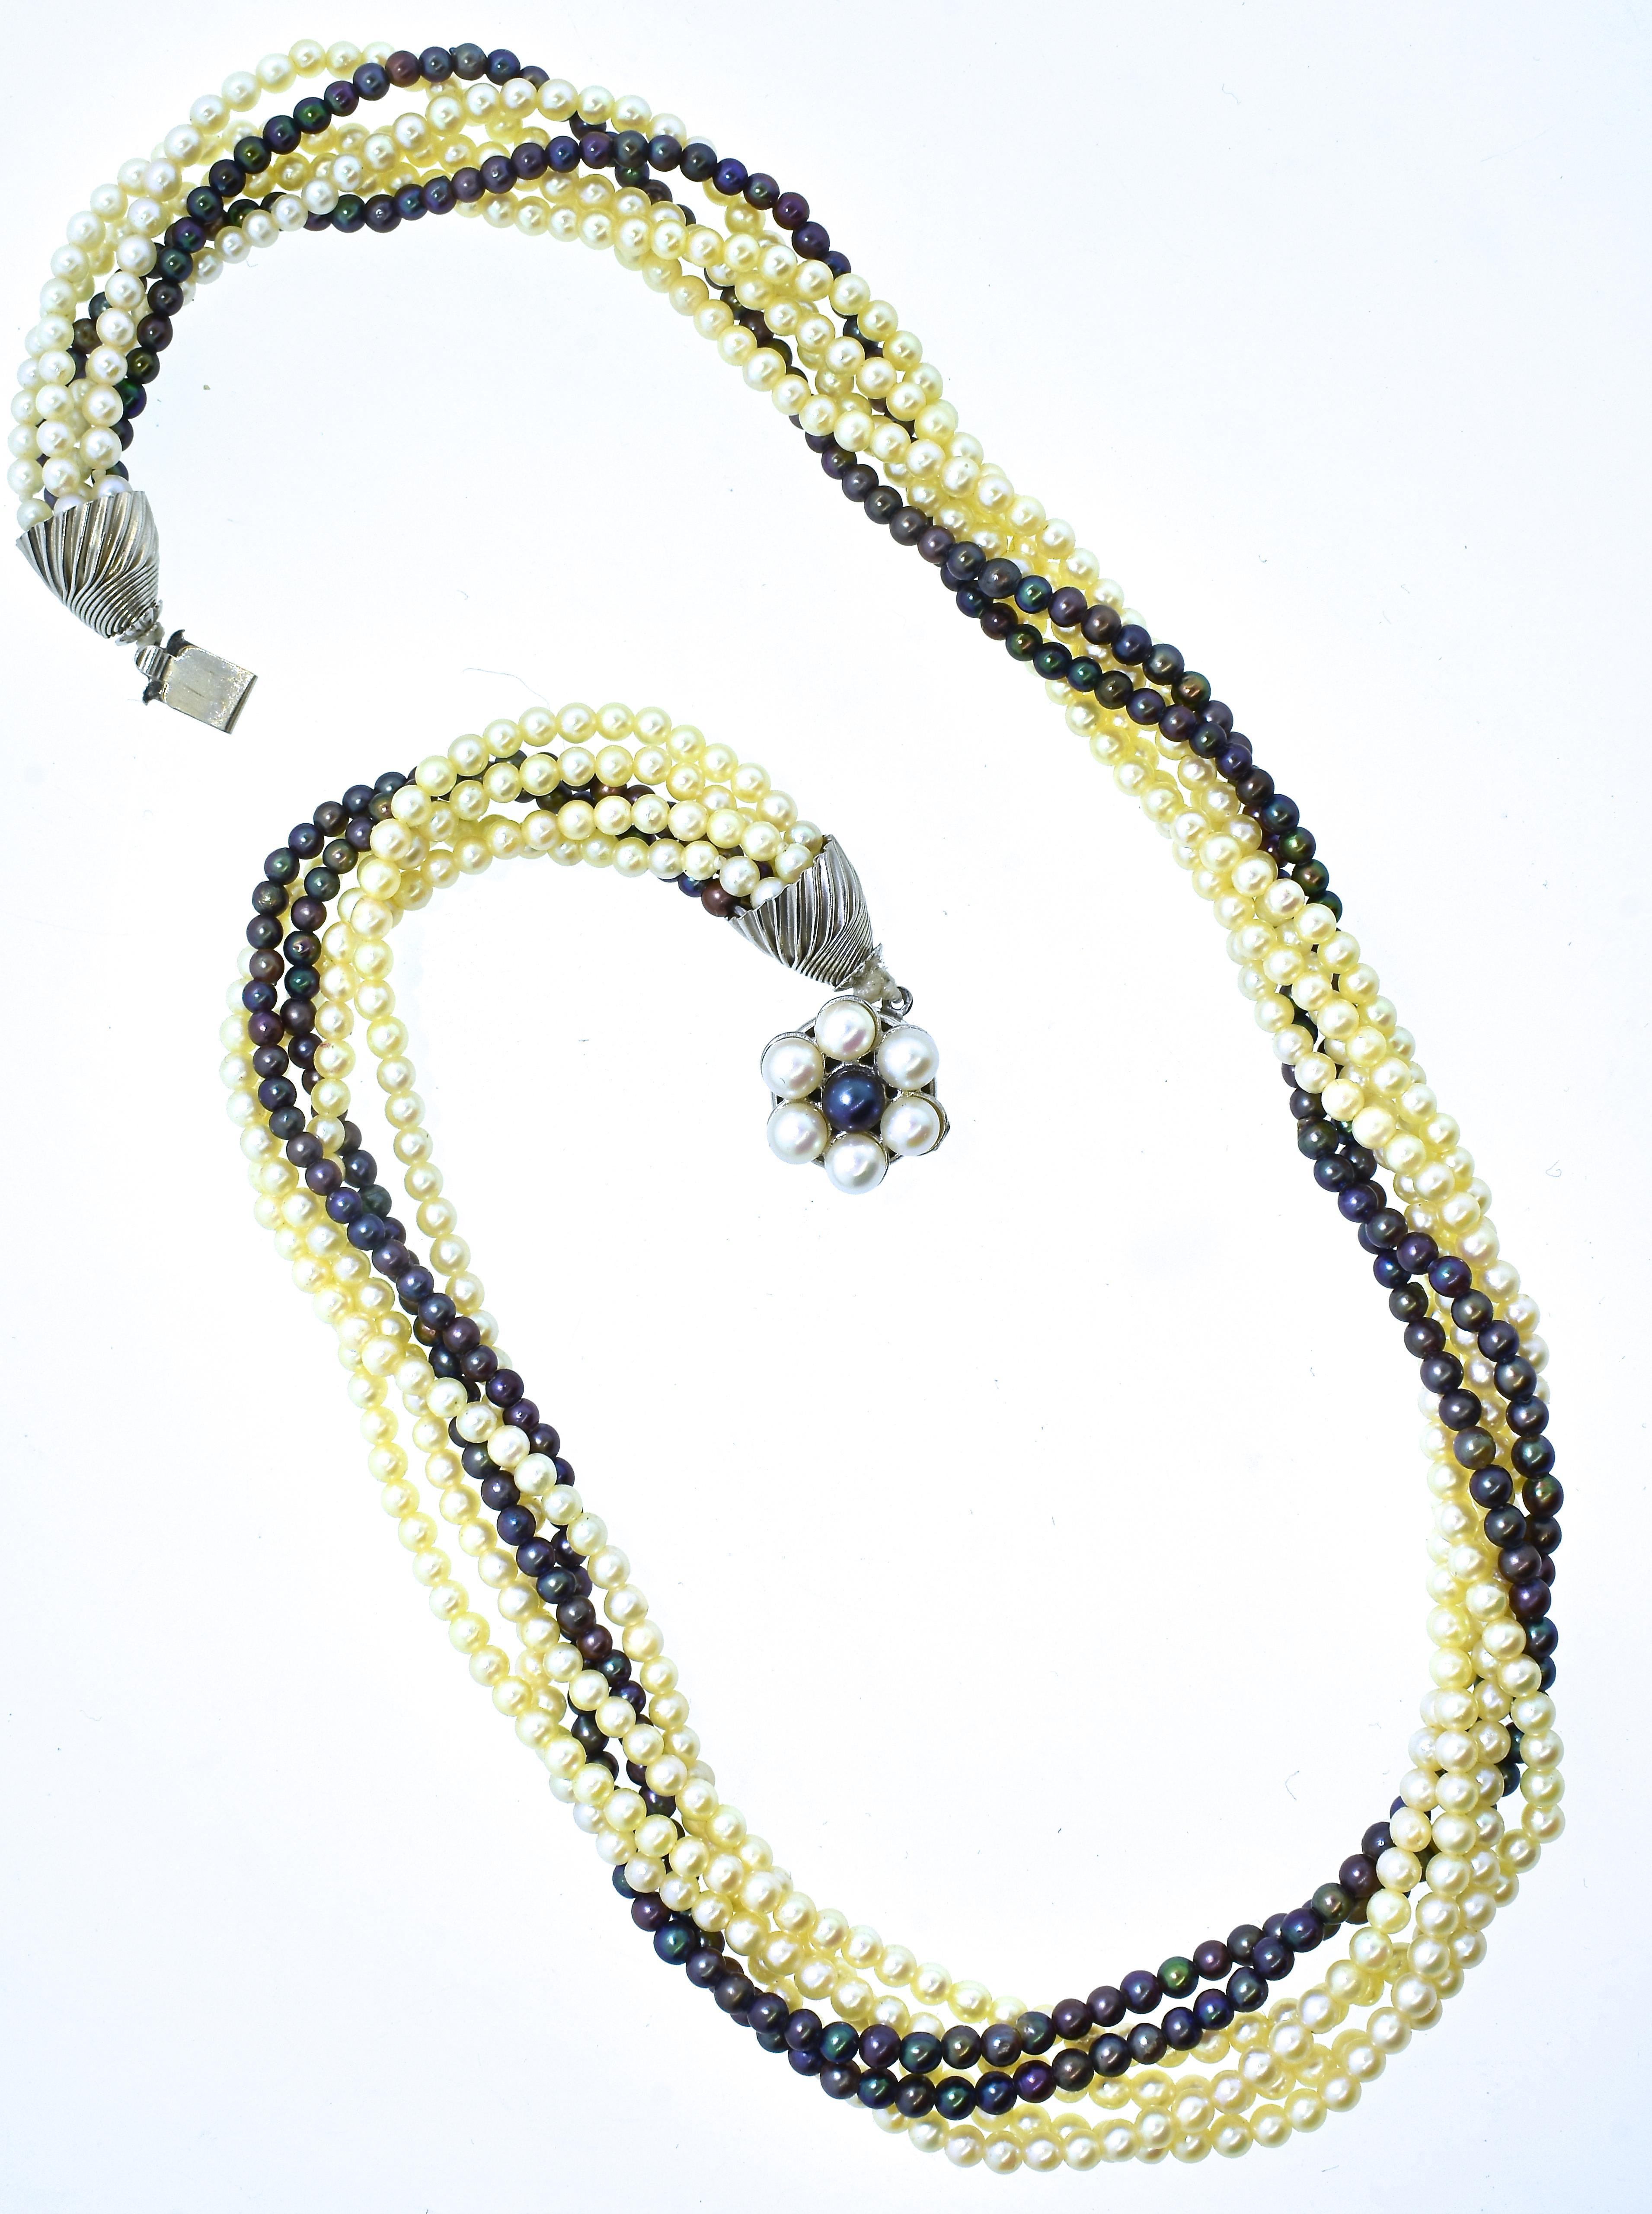   White and Black Akoya Pearls w/ a fancy white gold clasp/pendant, Contemporary For Sale 2